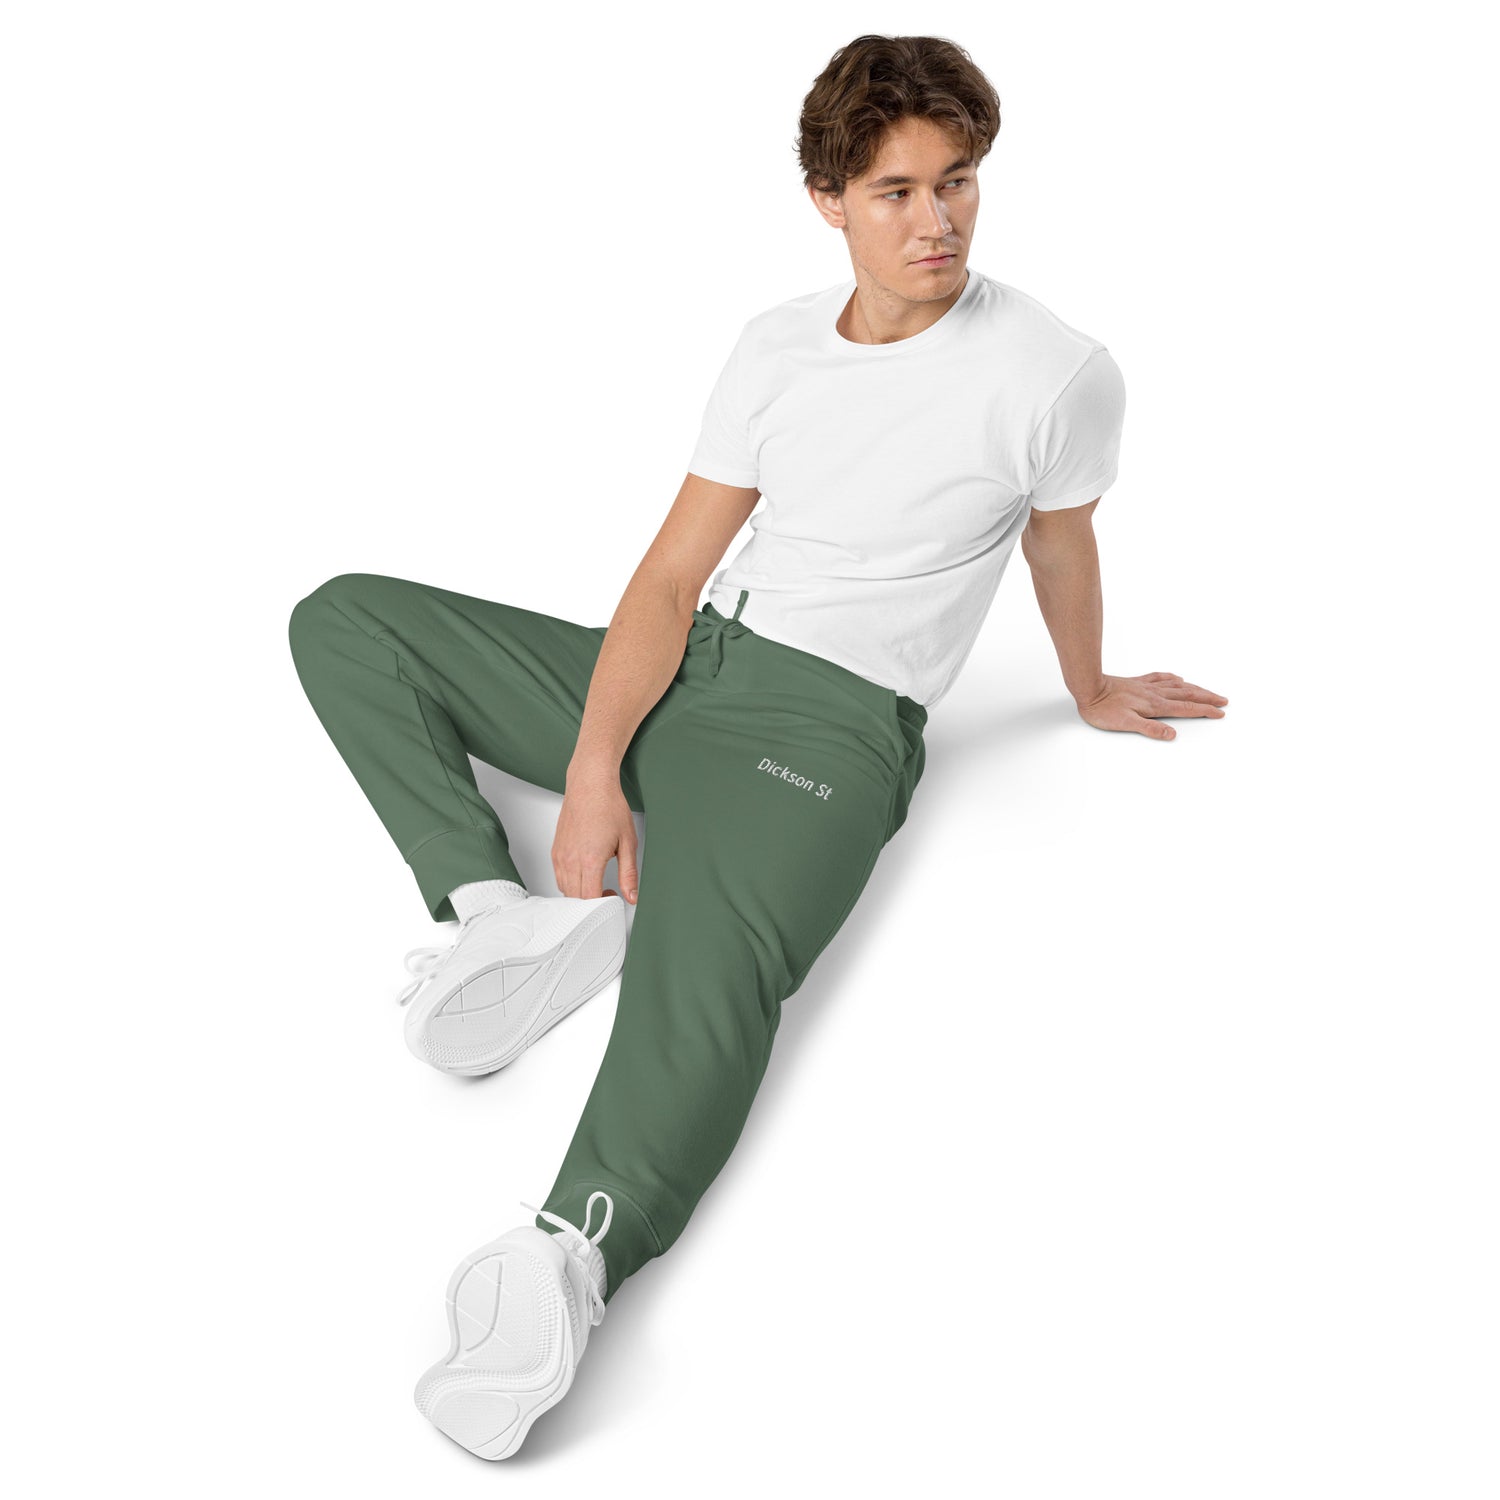 Dickson St Embroidered Unisex Pigment-Dyed Sweatpants